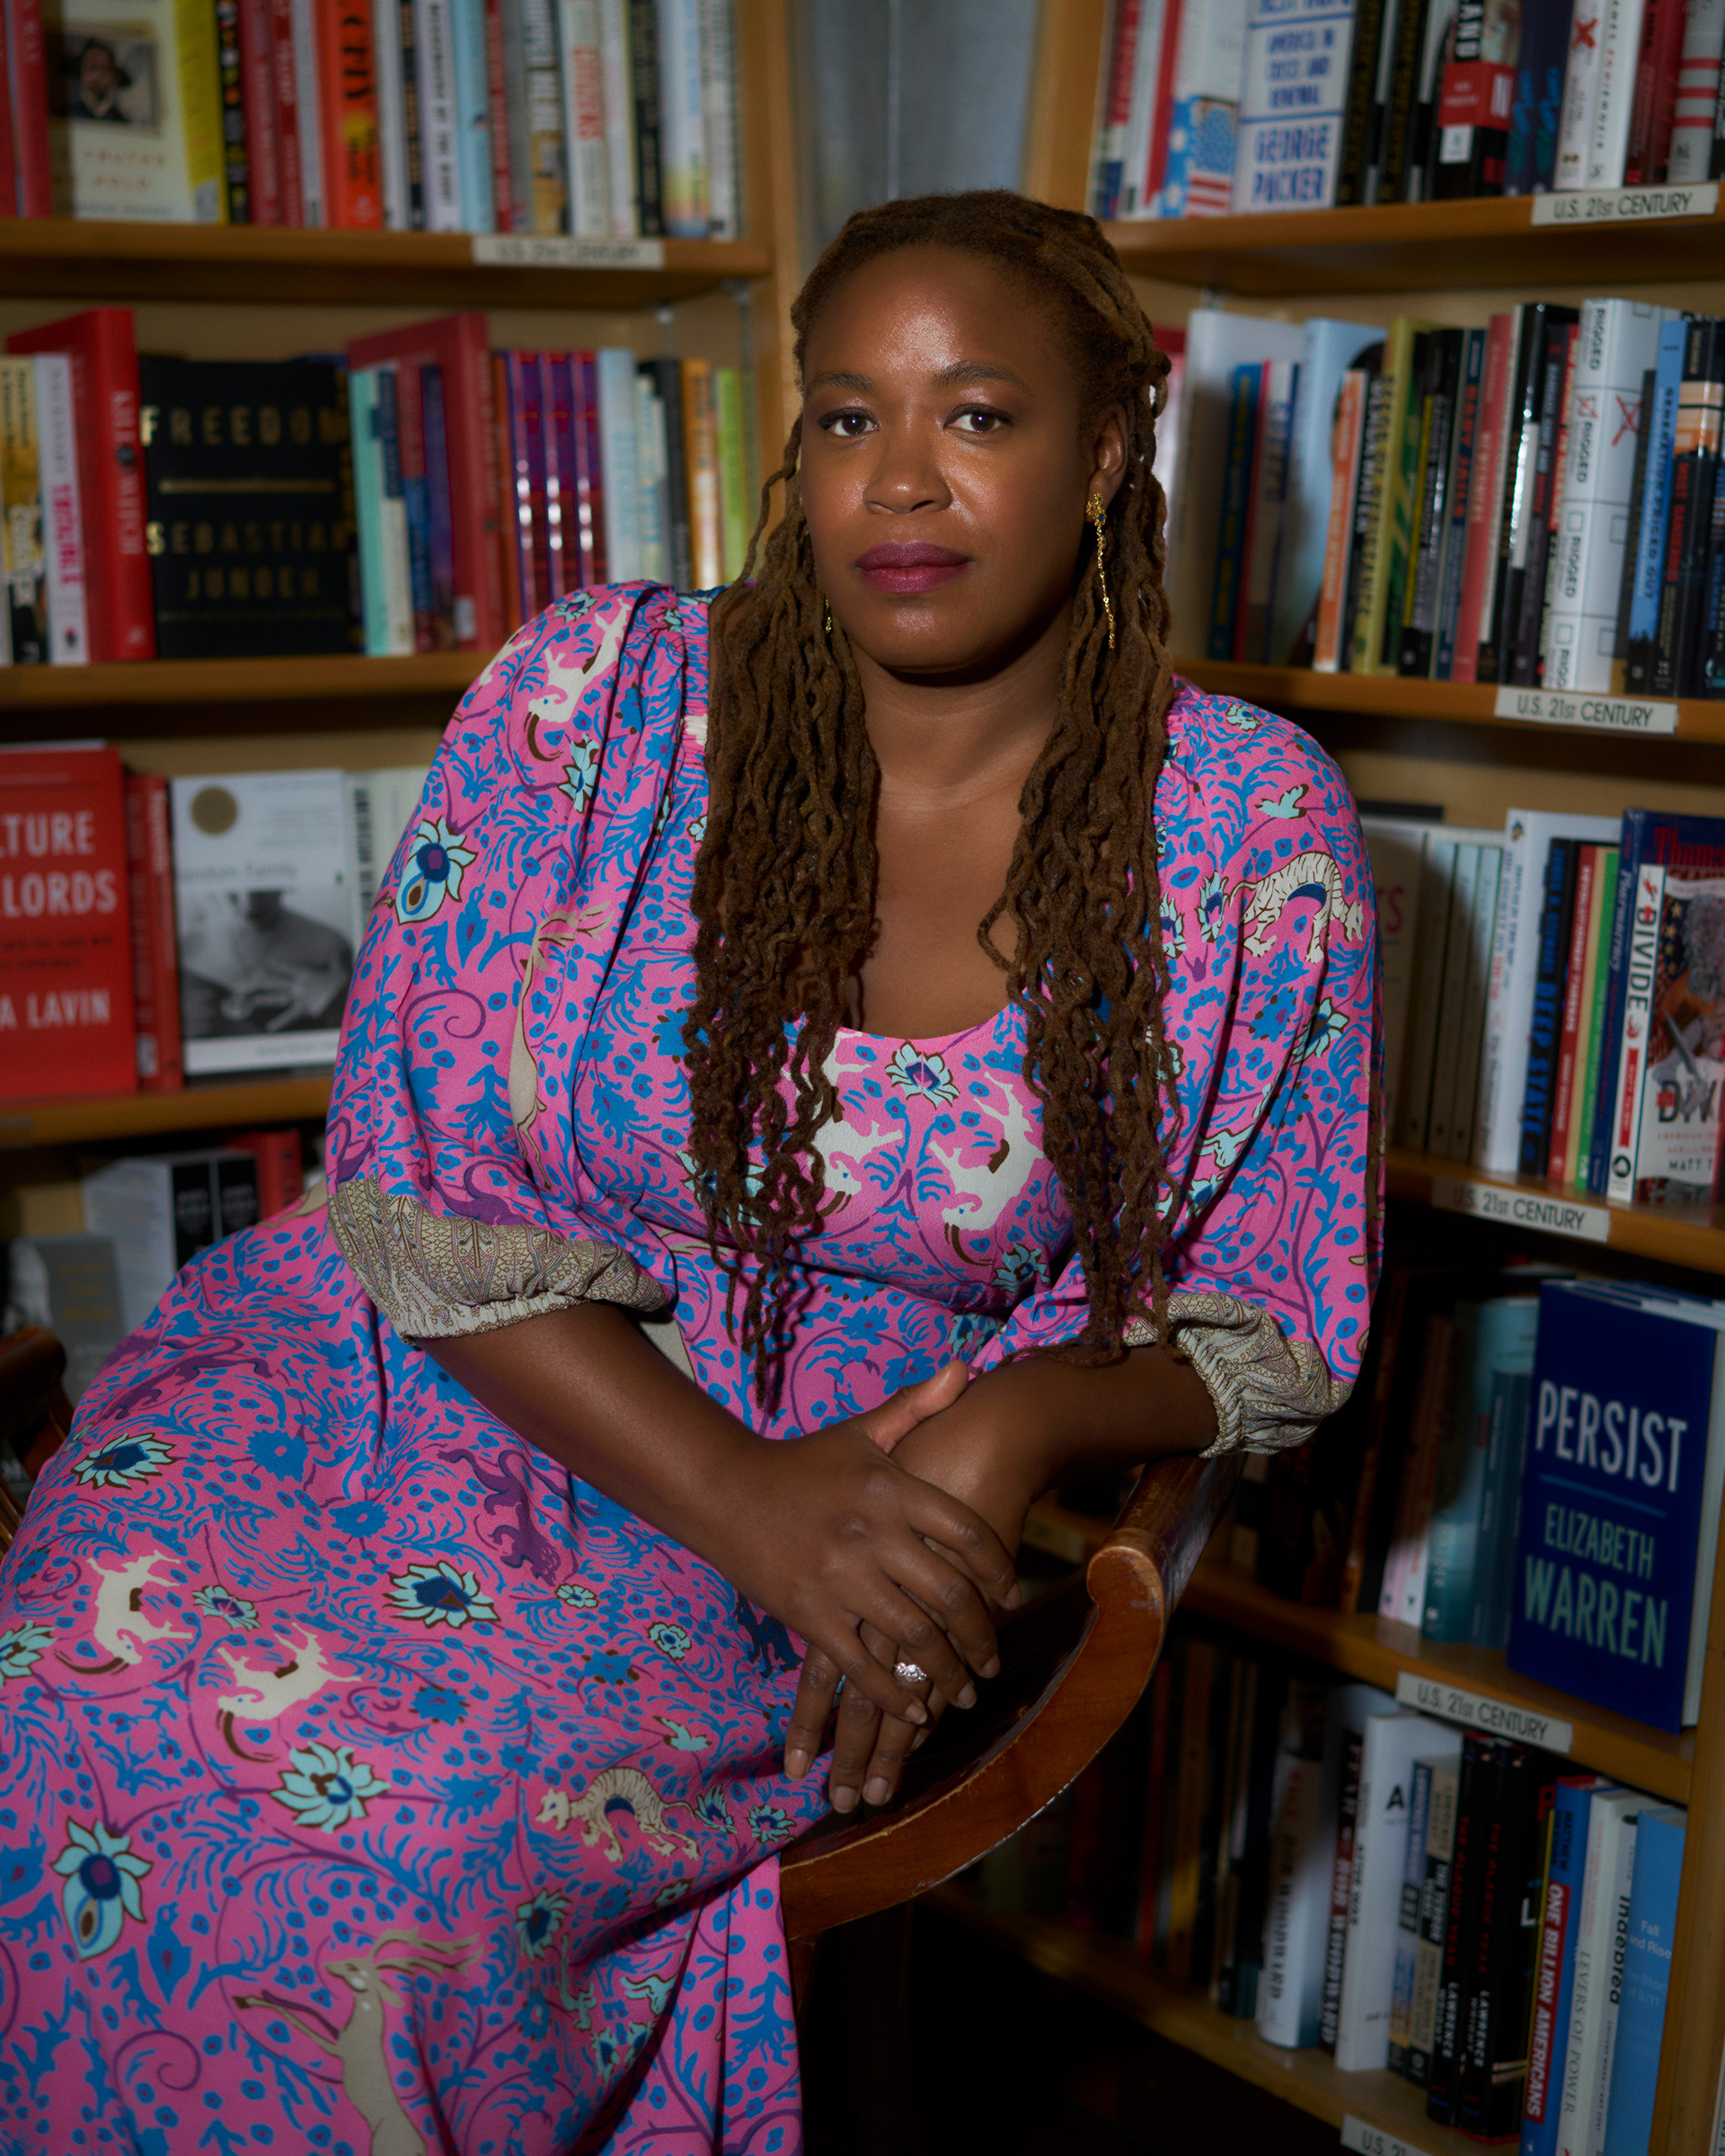 McGhee at McNally Jackson Books in Manhattan on July 1 (Yael Malka for TIME)